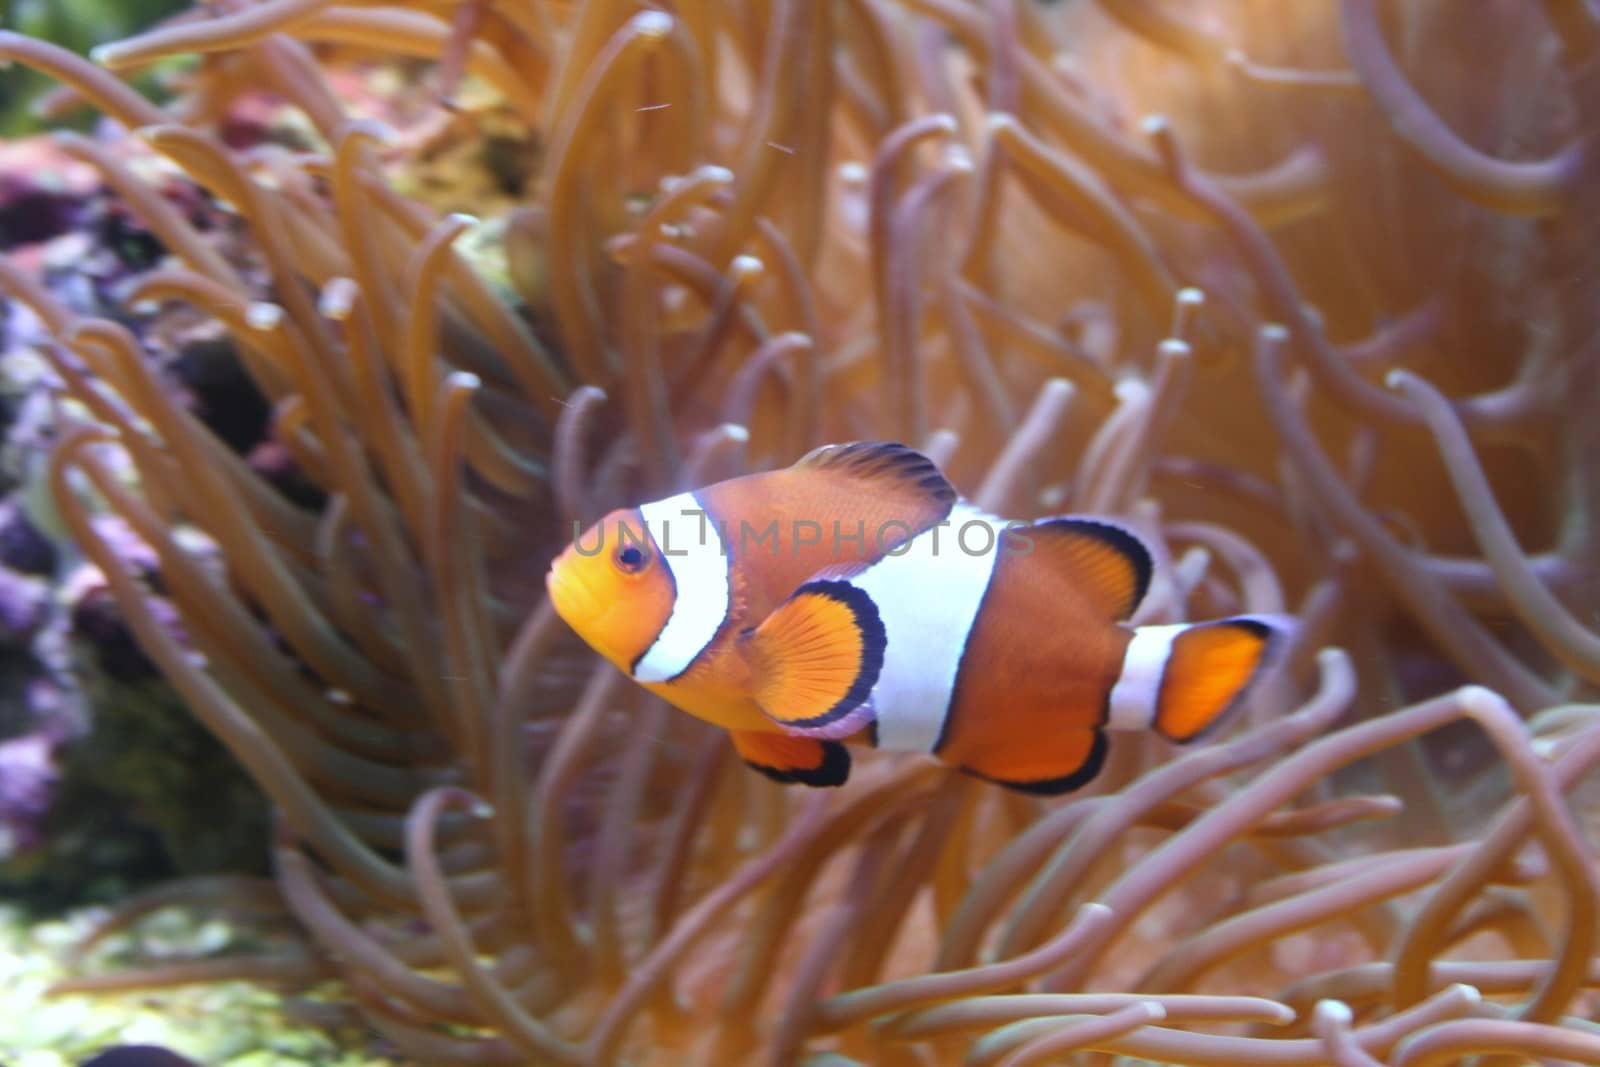 Clownfisch  (Amphiprion ocellaris) with See Anemone (Actiniaria)